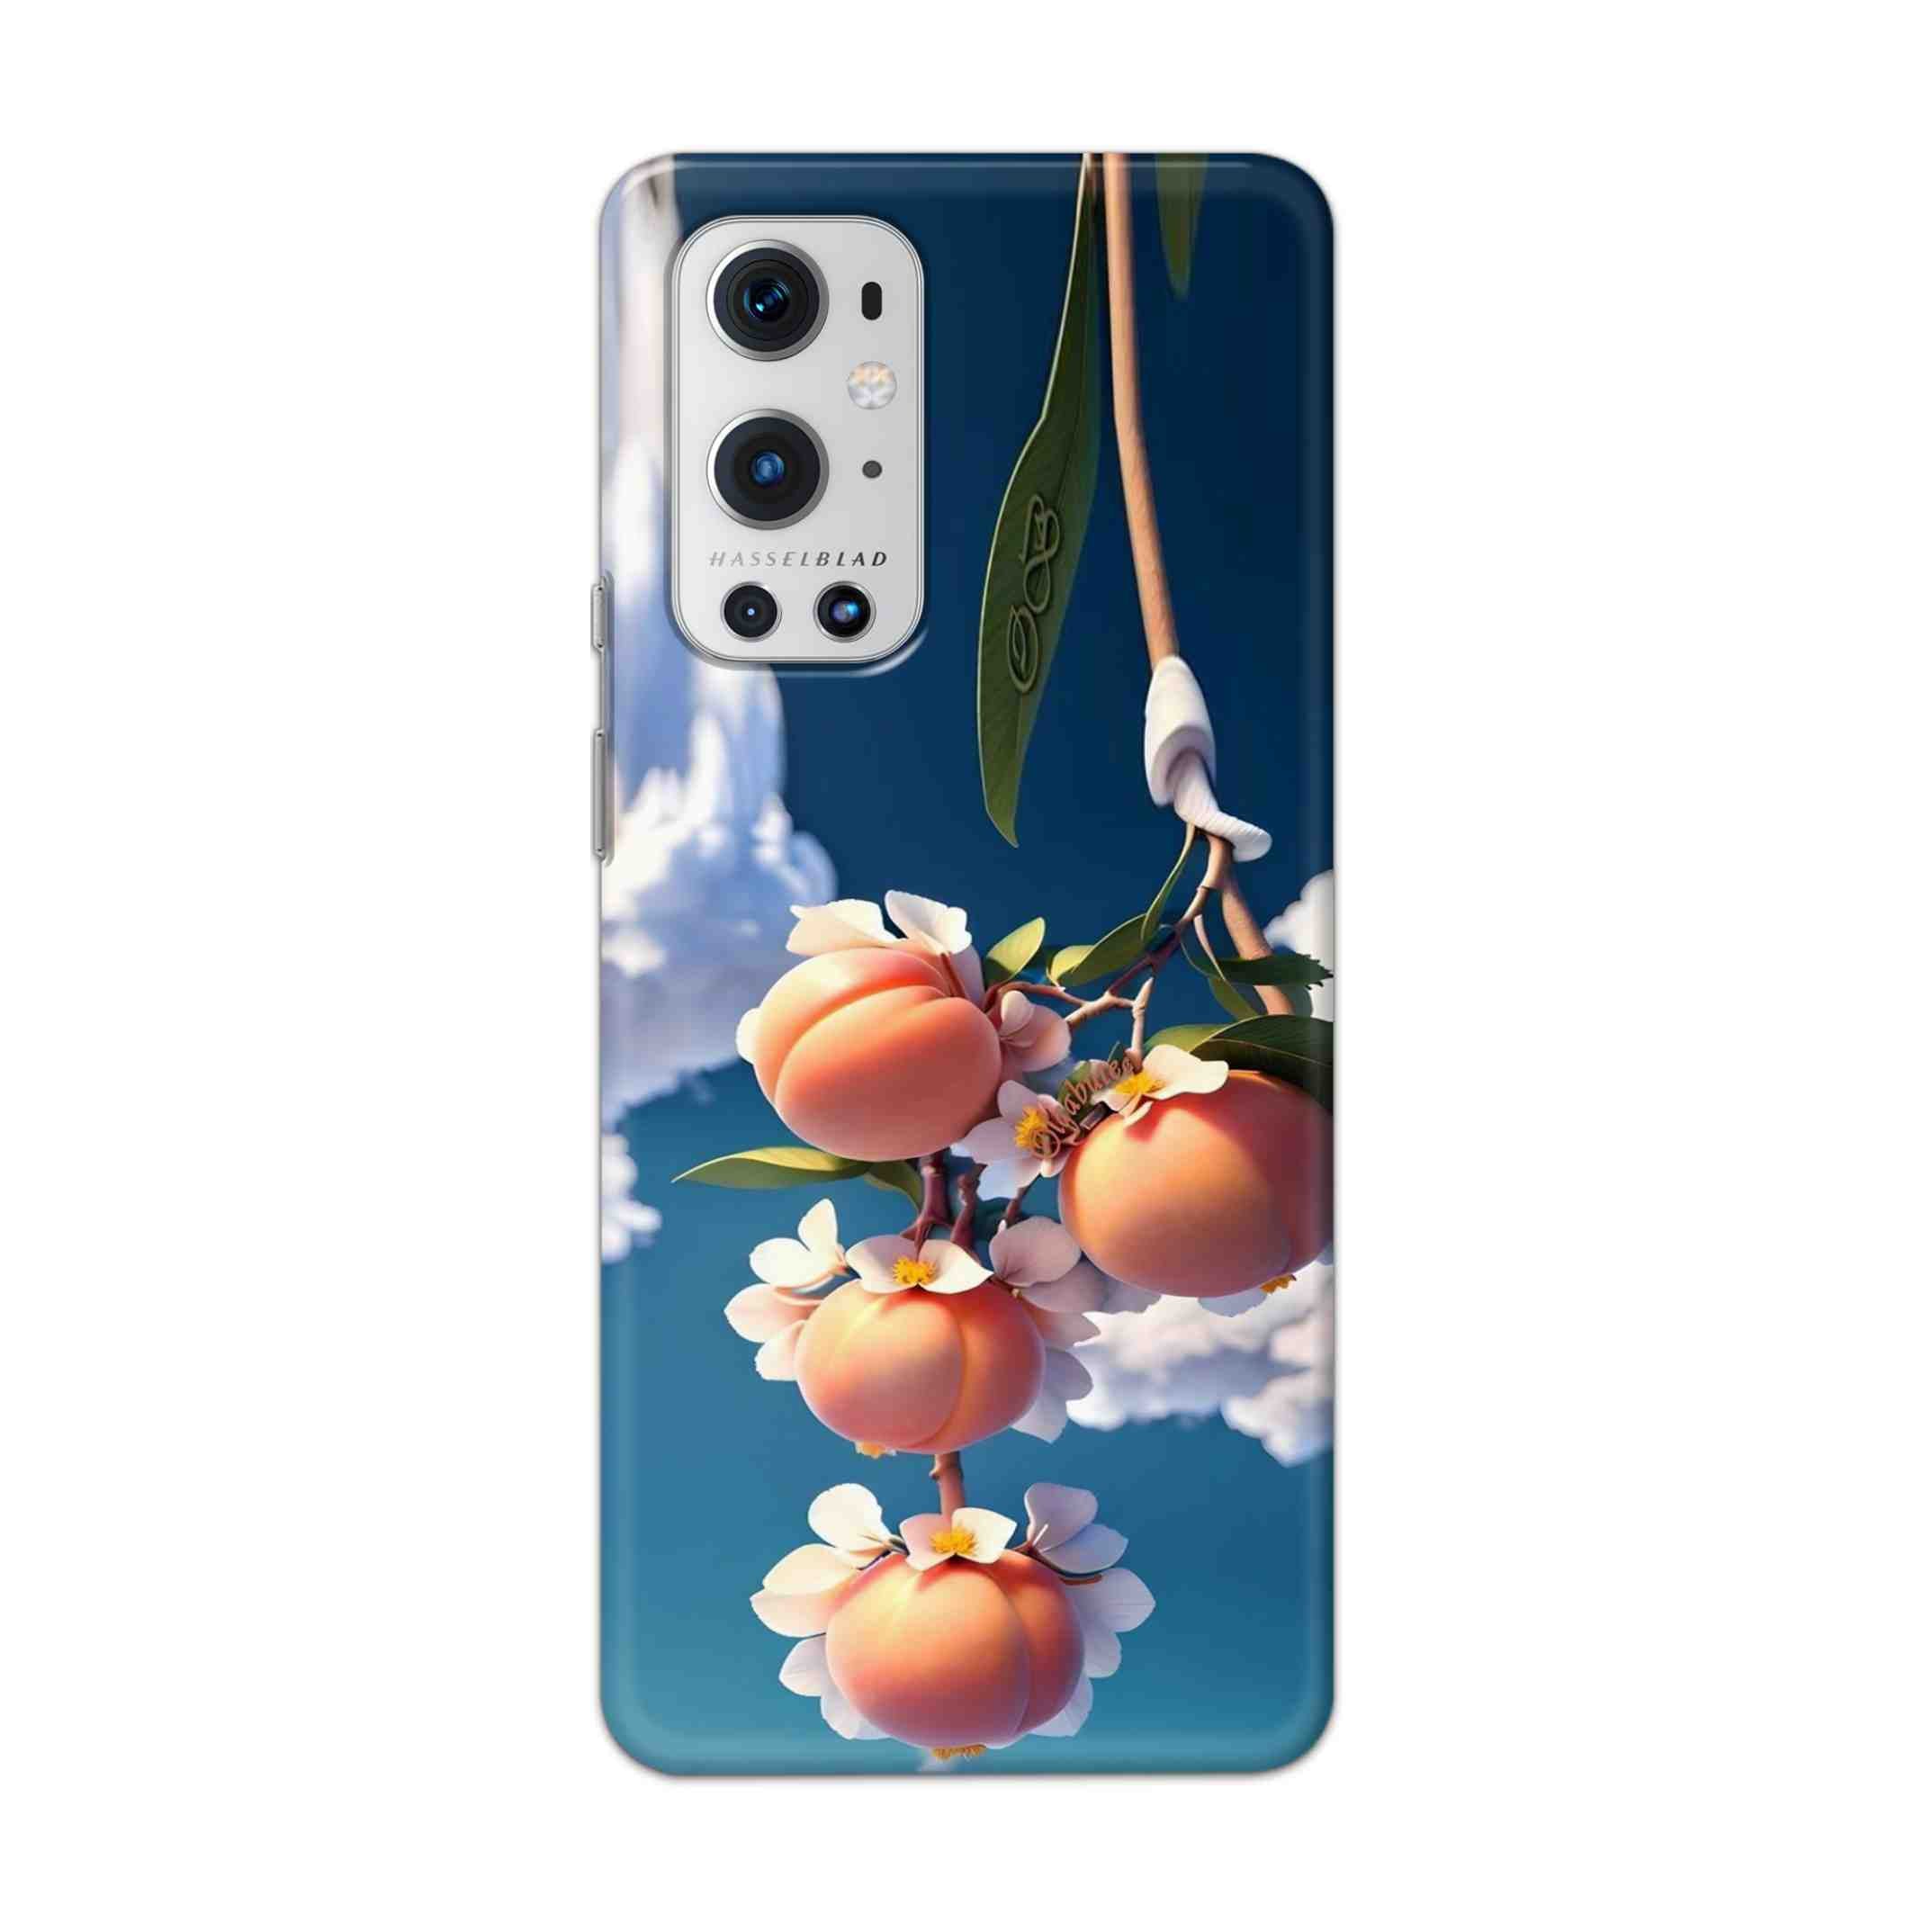 Buy Fruit Hard Back Mobile Phone Case Cover For OnePlus 9 Pro Online